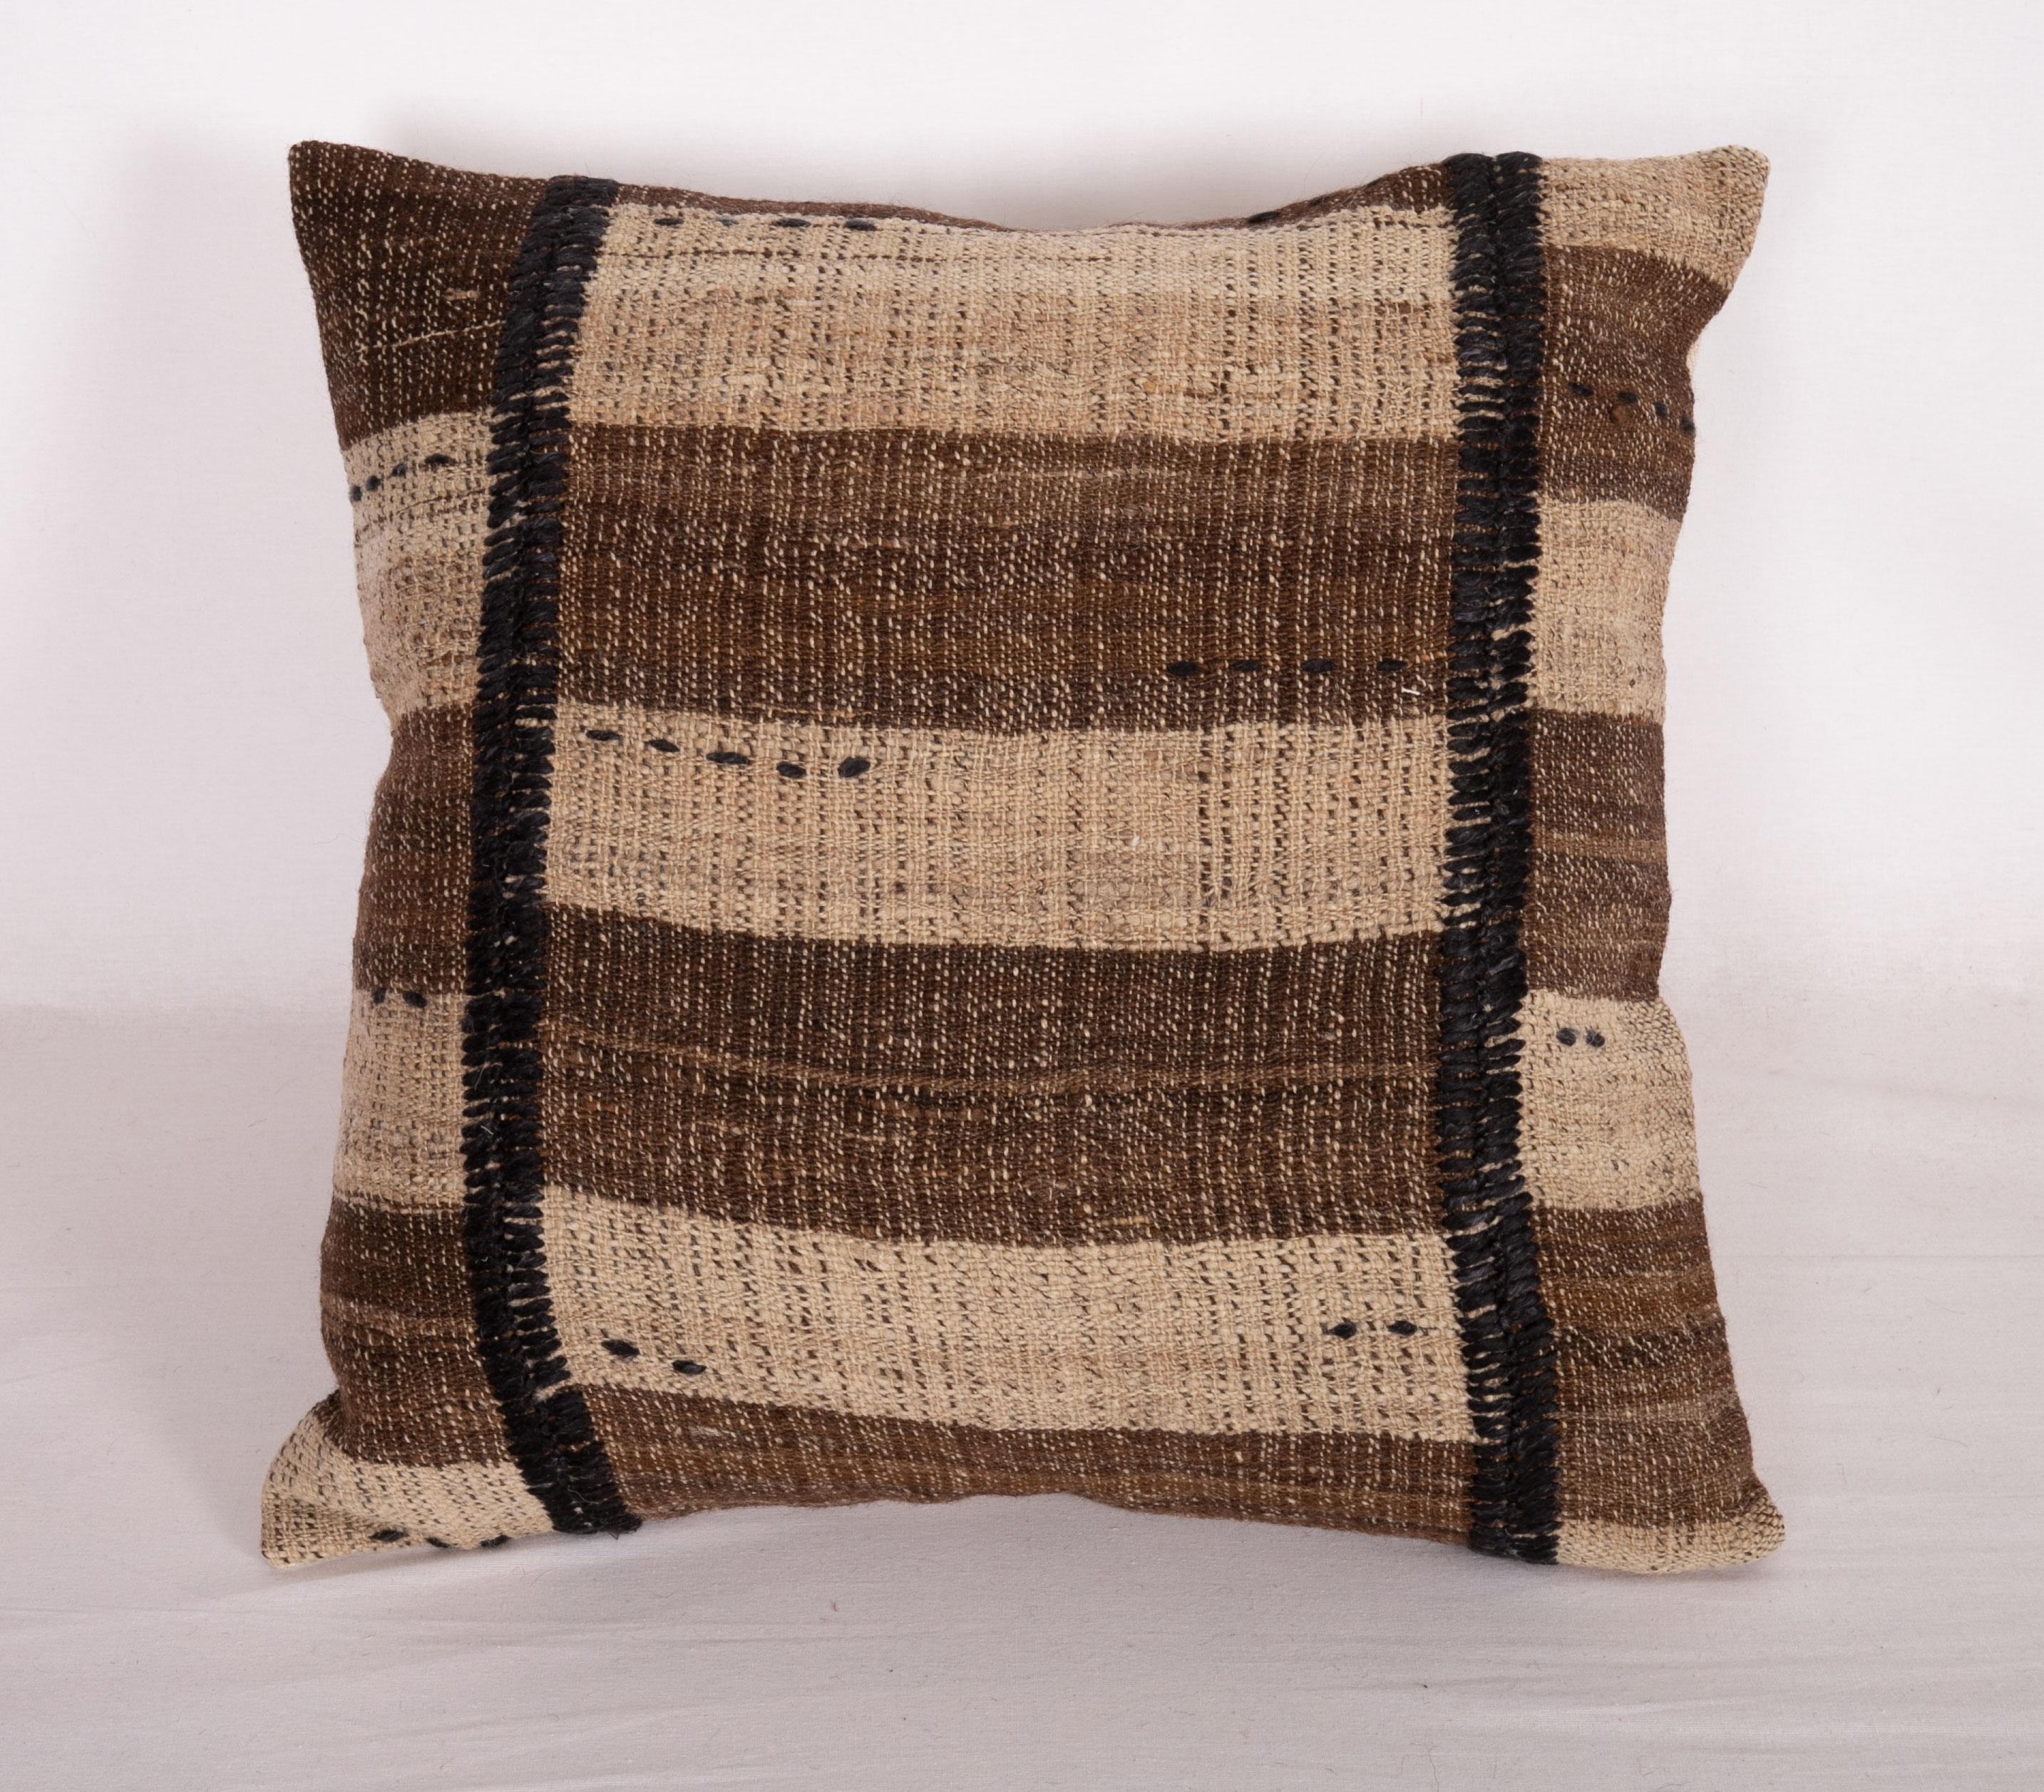 Kilim Neutral Pillowcases Made from an Anatolian Vintage Cover, Mid-20th Century